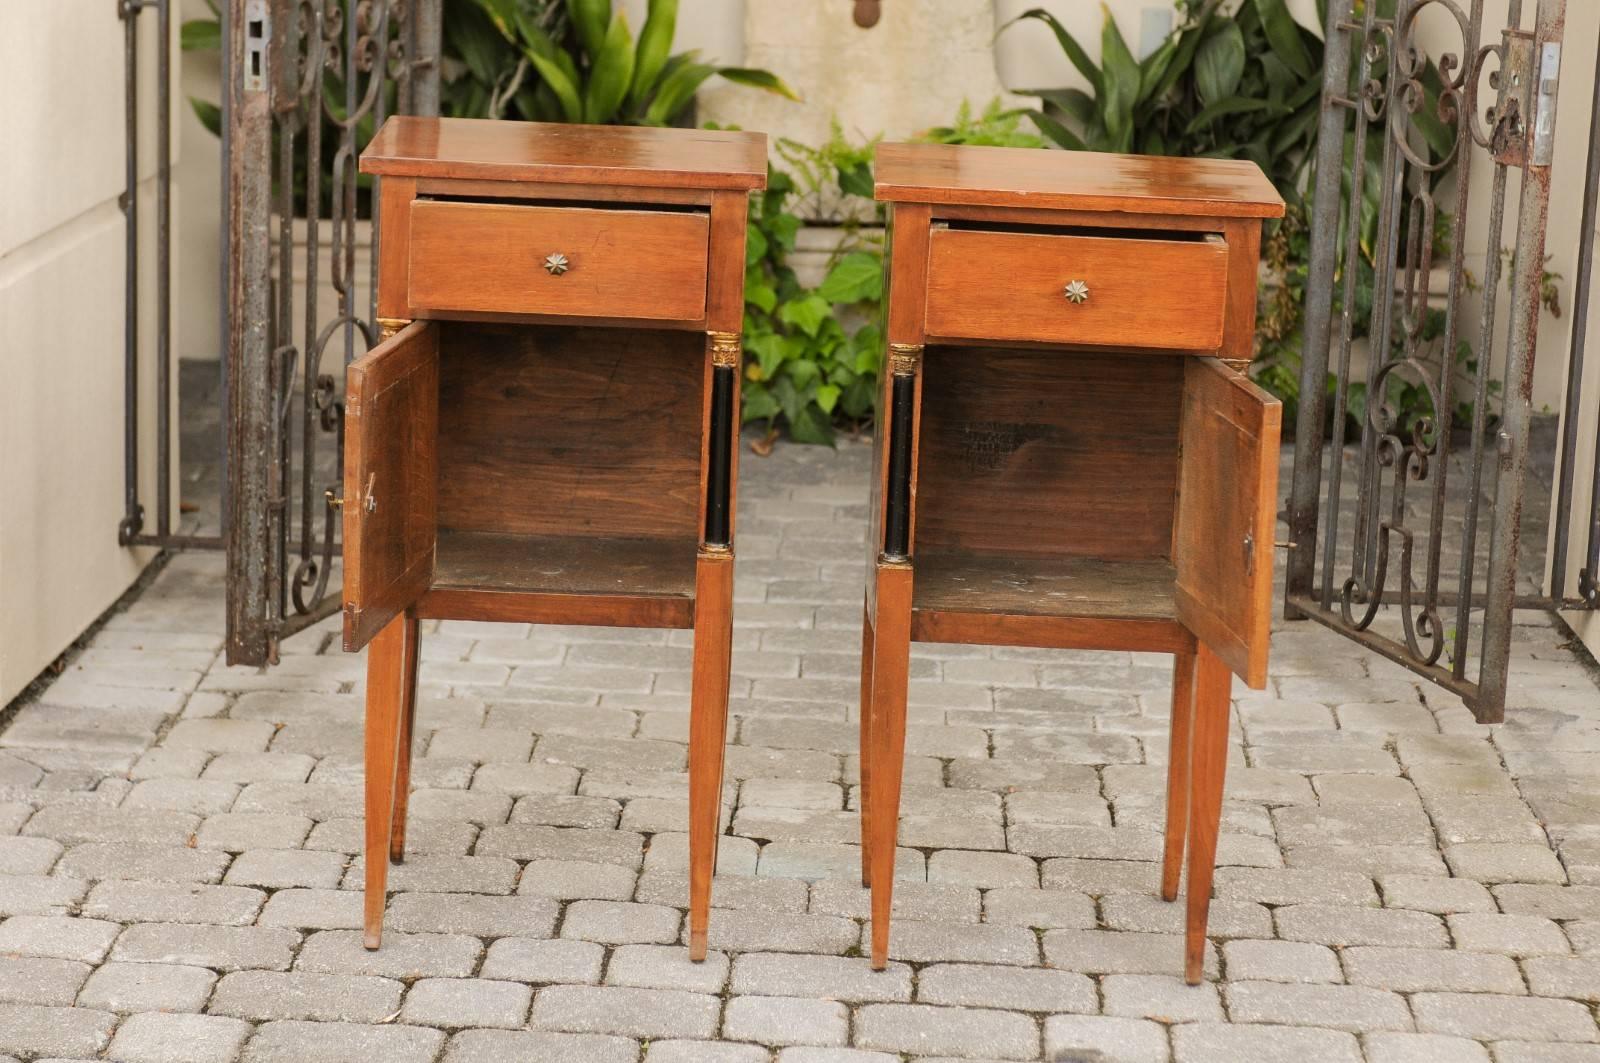 Pair of 1840s Biedermeier Walnut Stands with Drawer, Door and Semi-Columns For Sale 5